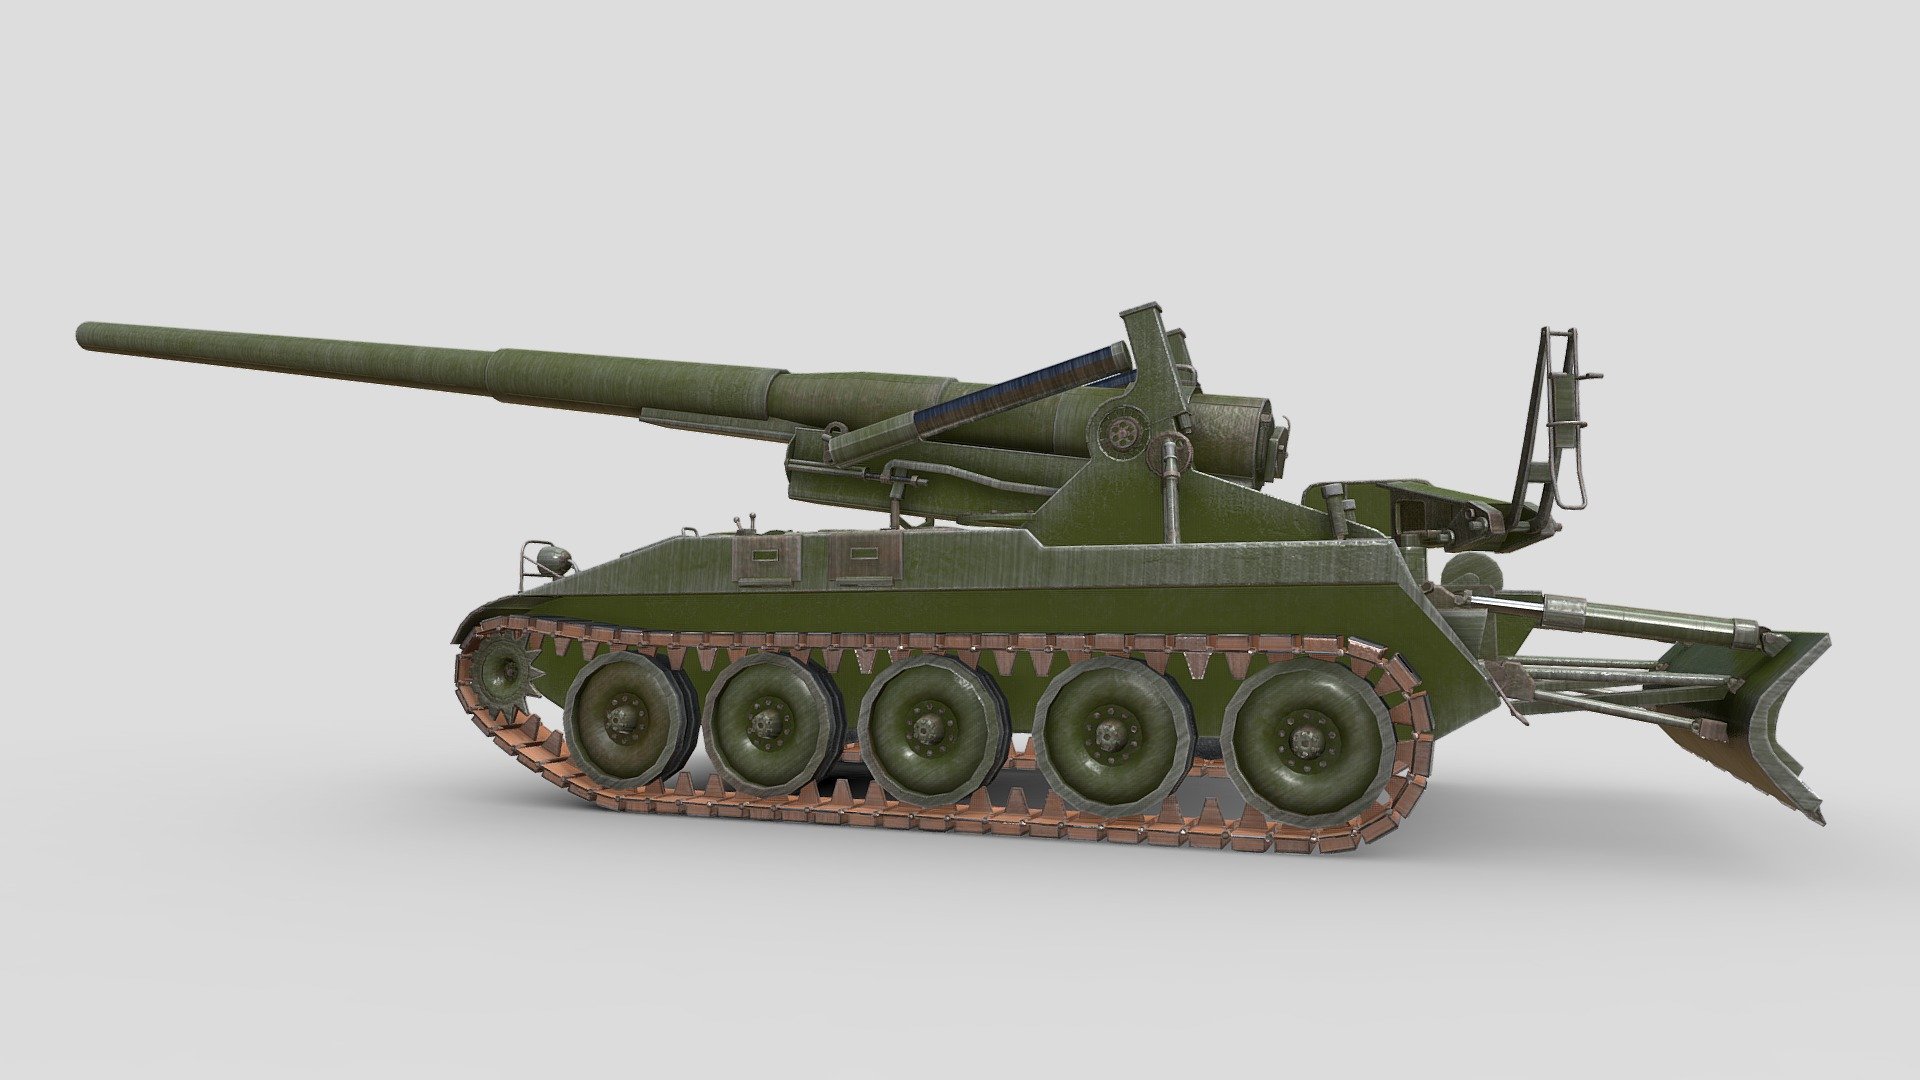 The M107 175 mm self-propelled gun was used by the U.S. Army and U.S. Marine Corps from the early 1960s to the late 1970s. It was also used by a number of allied countries in the second half of the 20th century.

The model was modeled in Blender and textured in Substance Painter, it contains 4K textures and about 25000 faces 3d model